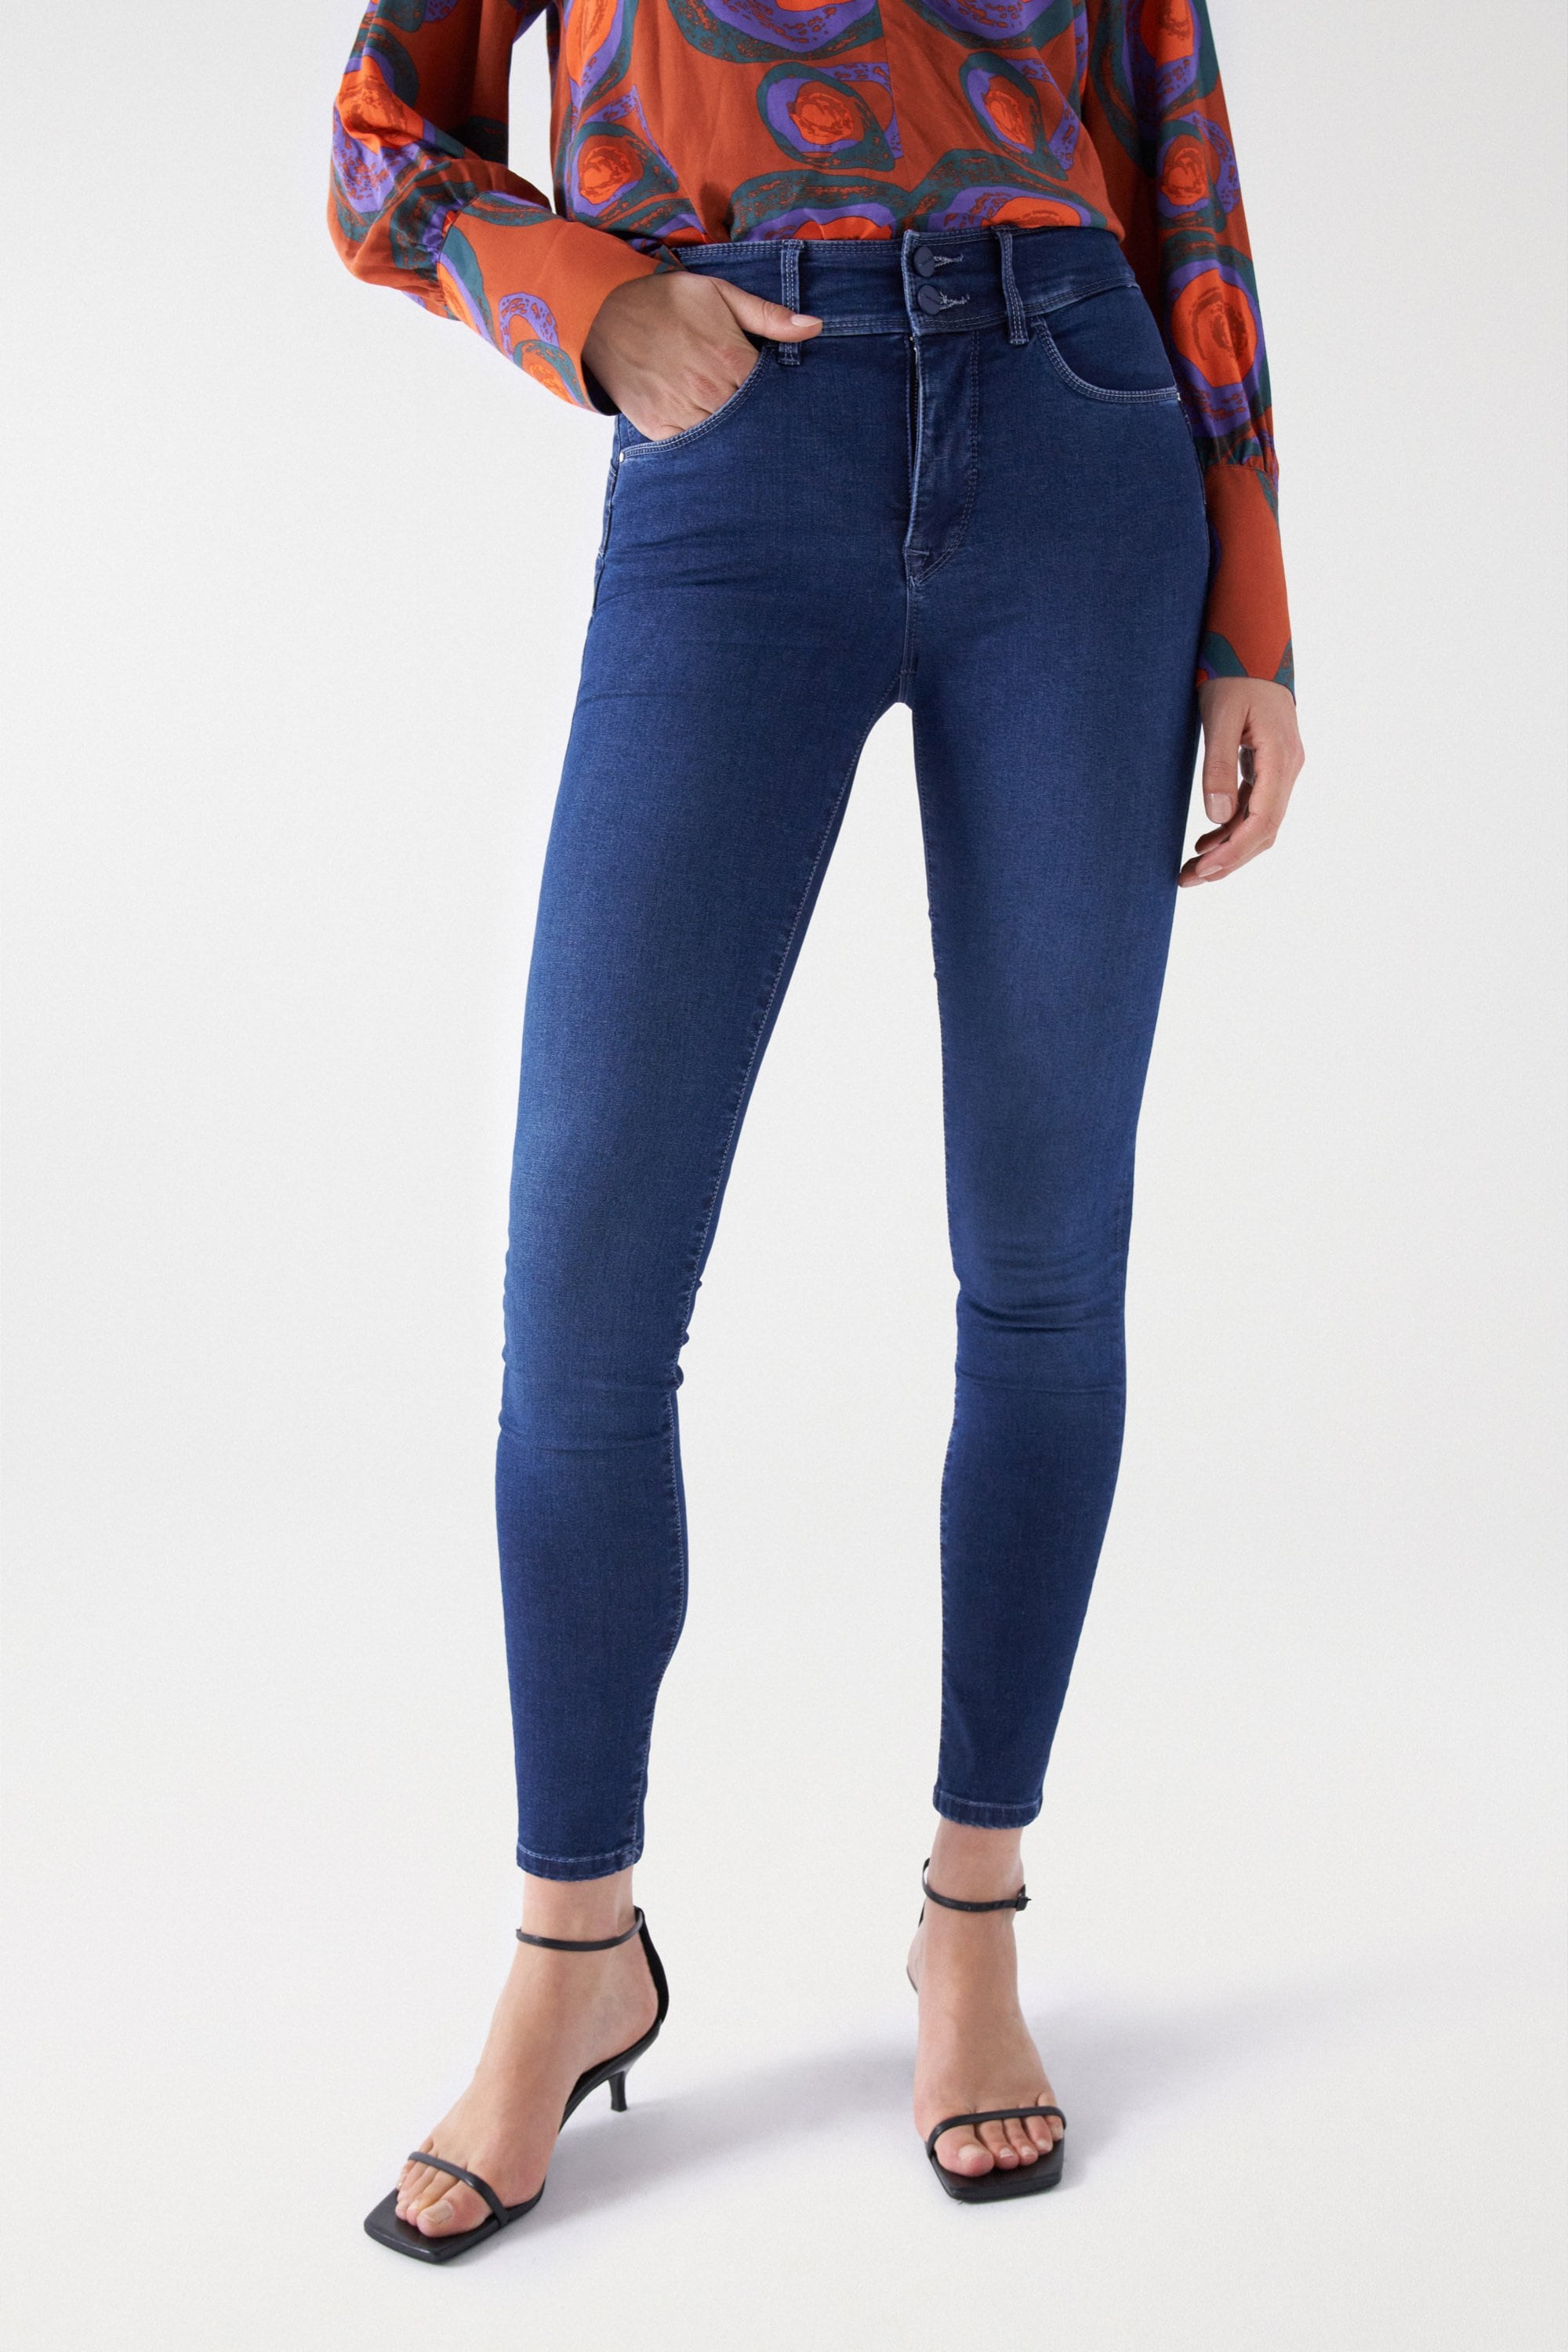 Secret With Embroidery in Medium Wash Jeans Salsa Jeans   